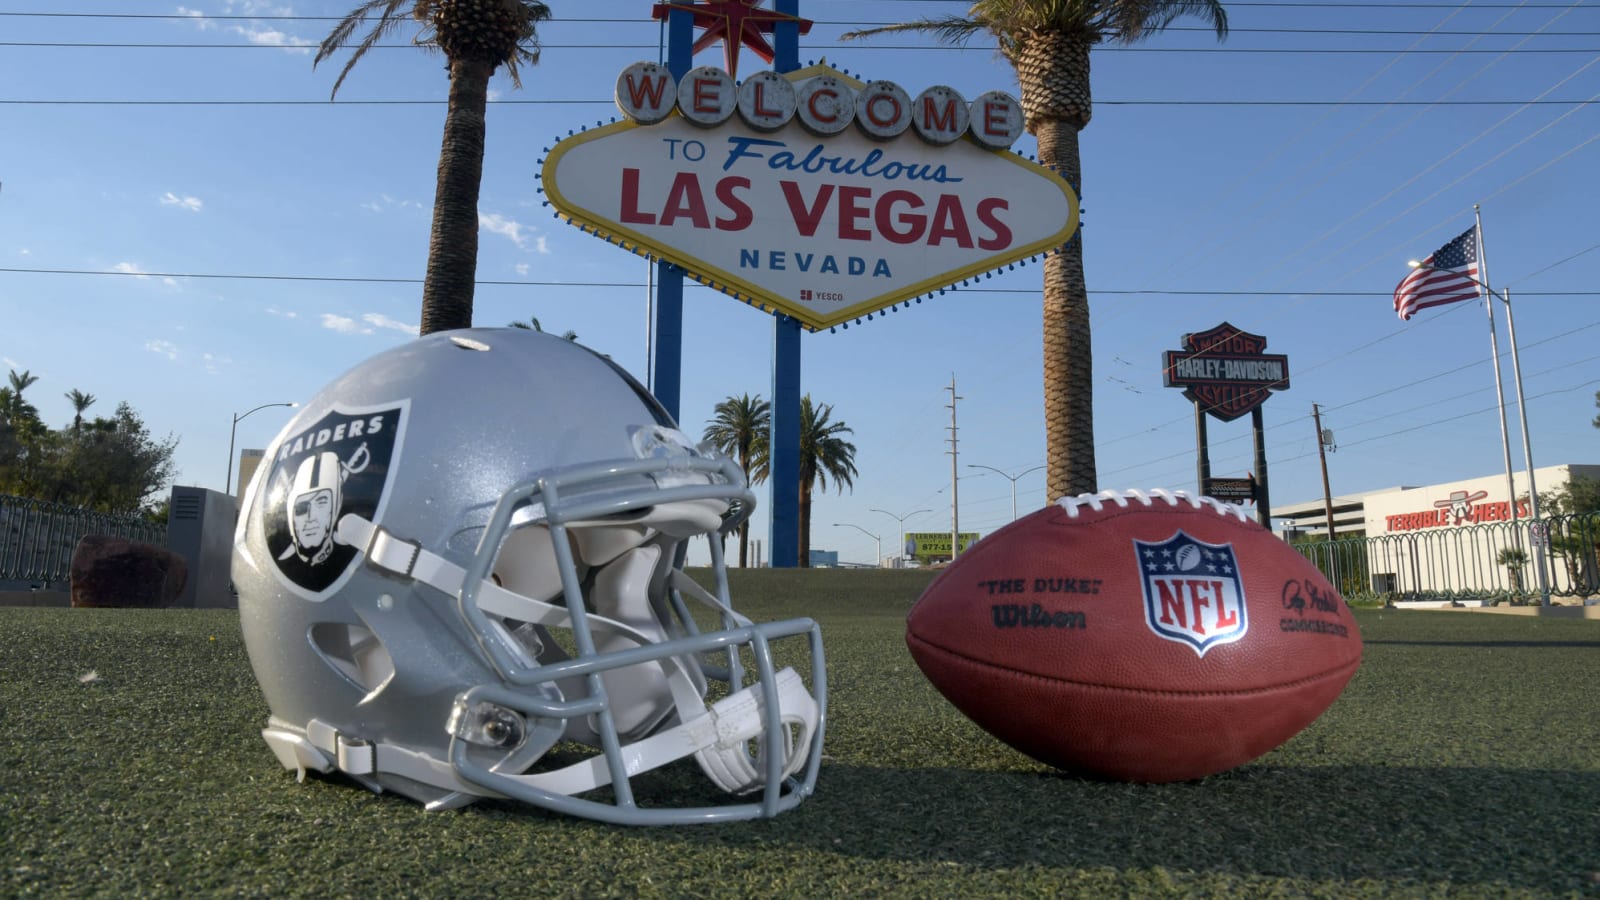 Las Vegas Raiders could lose staggering amount without stadium attendance this season